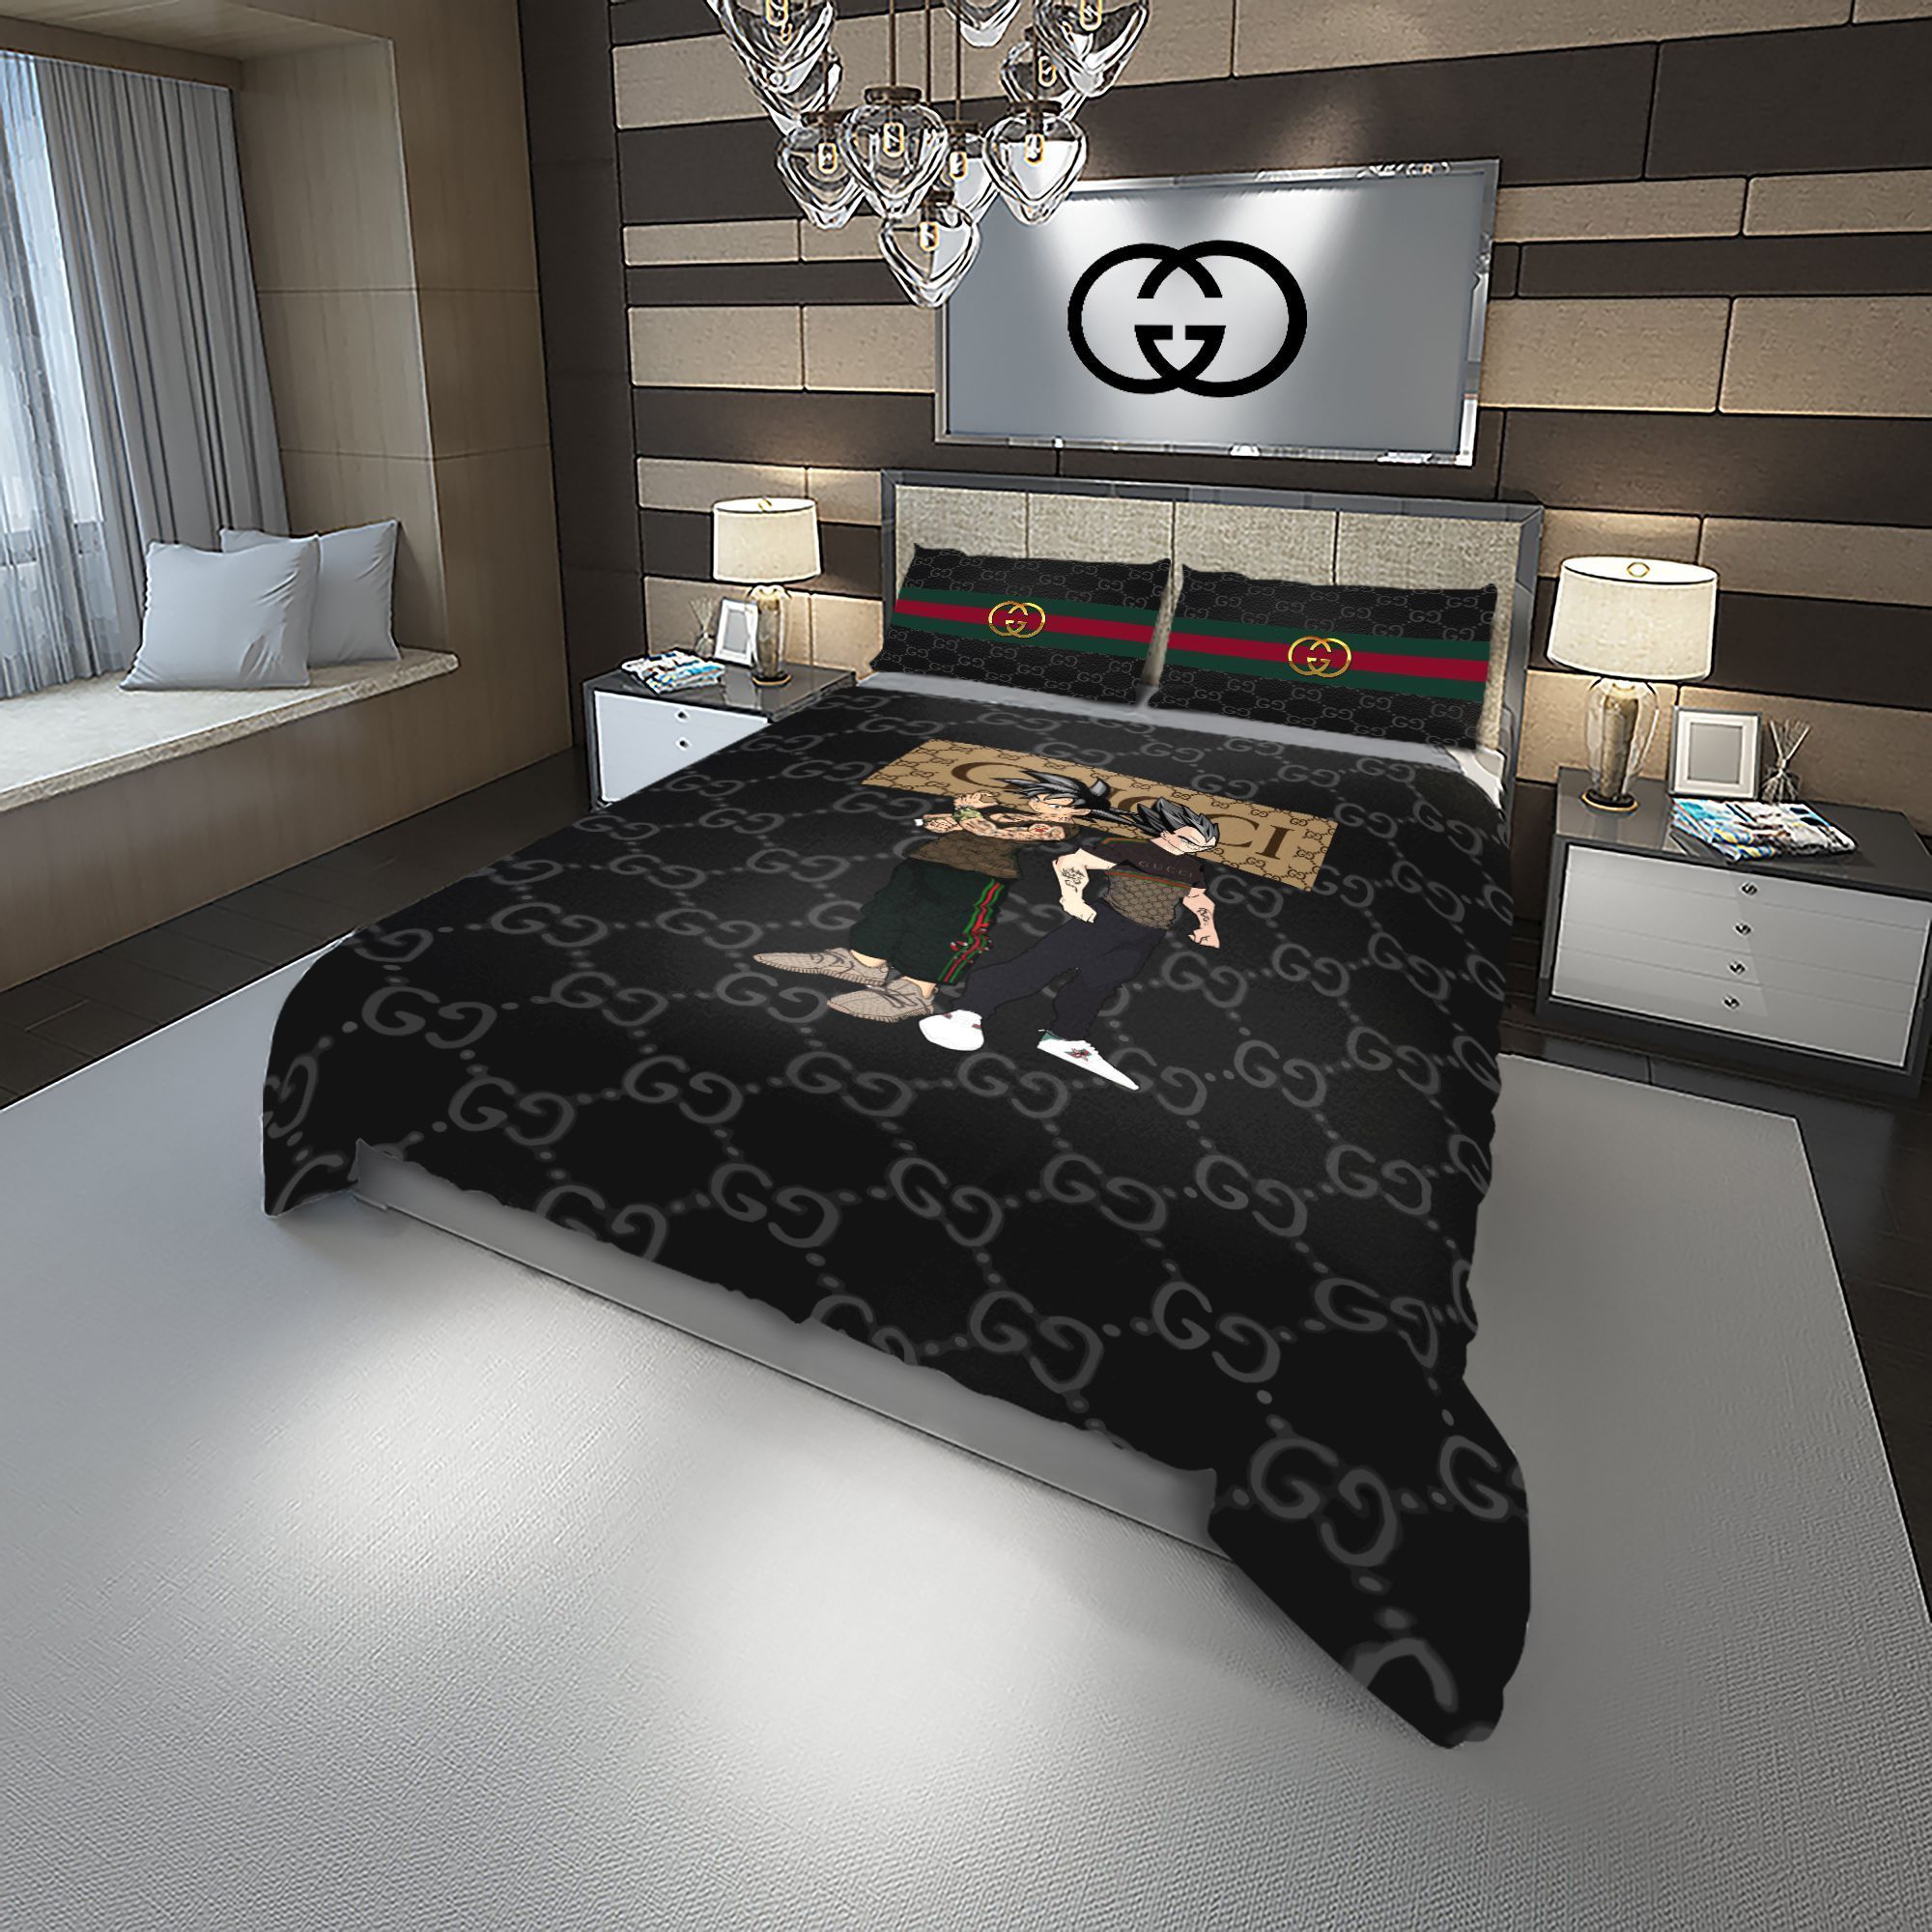 Let me show you about some luxury brand bedding set 2022 4